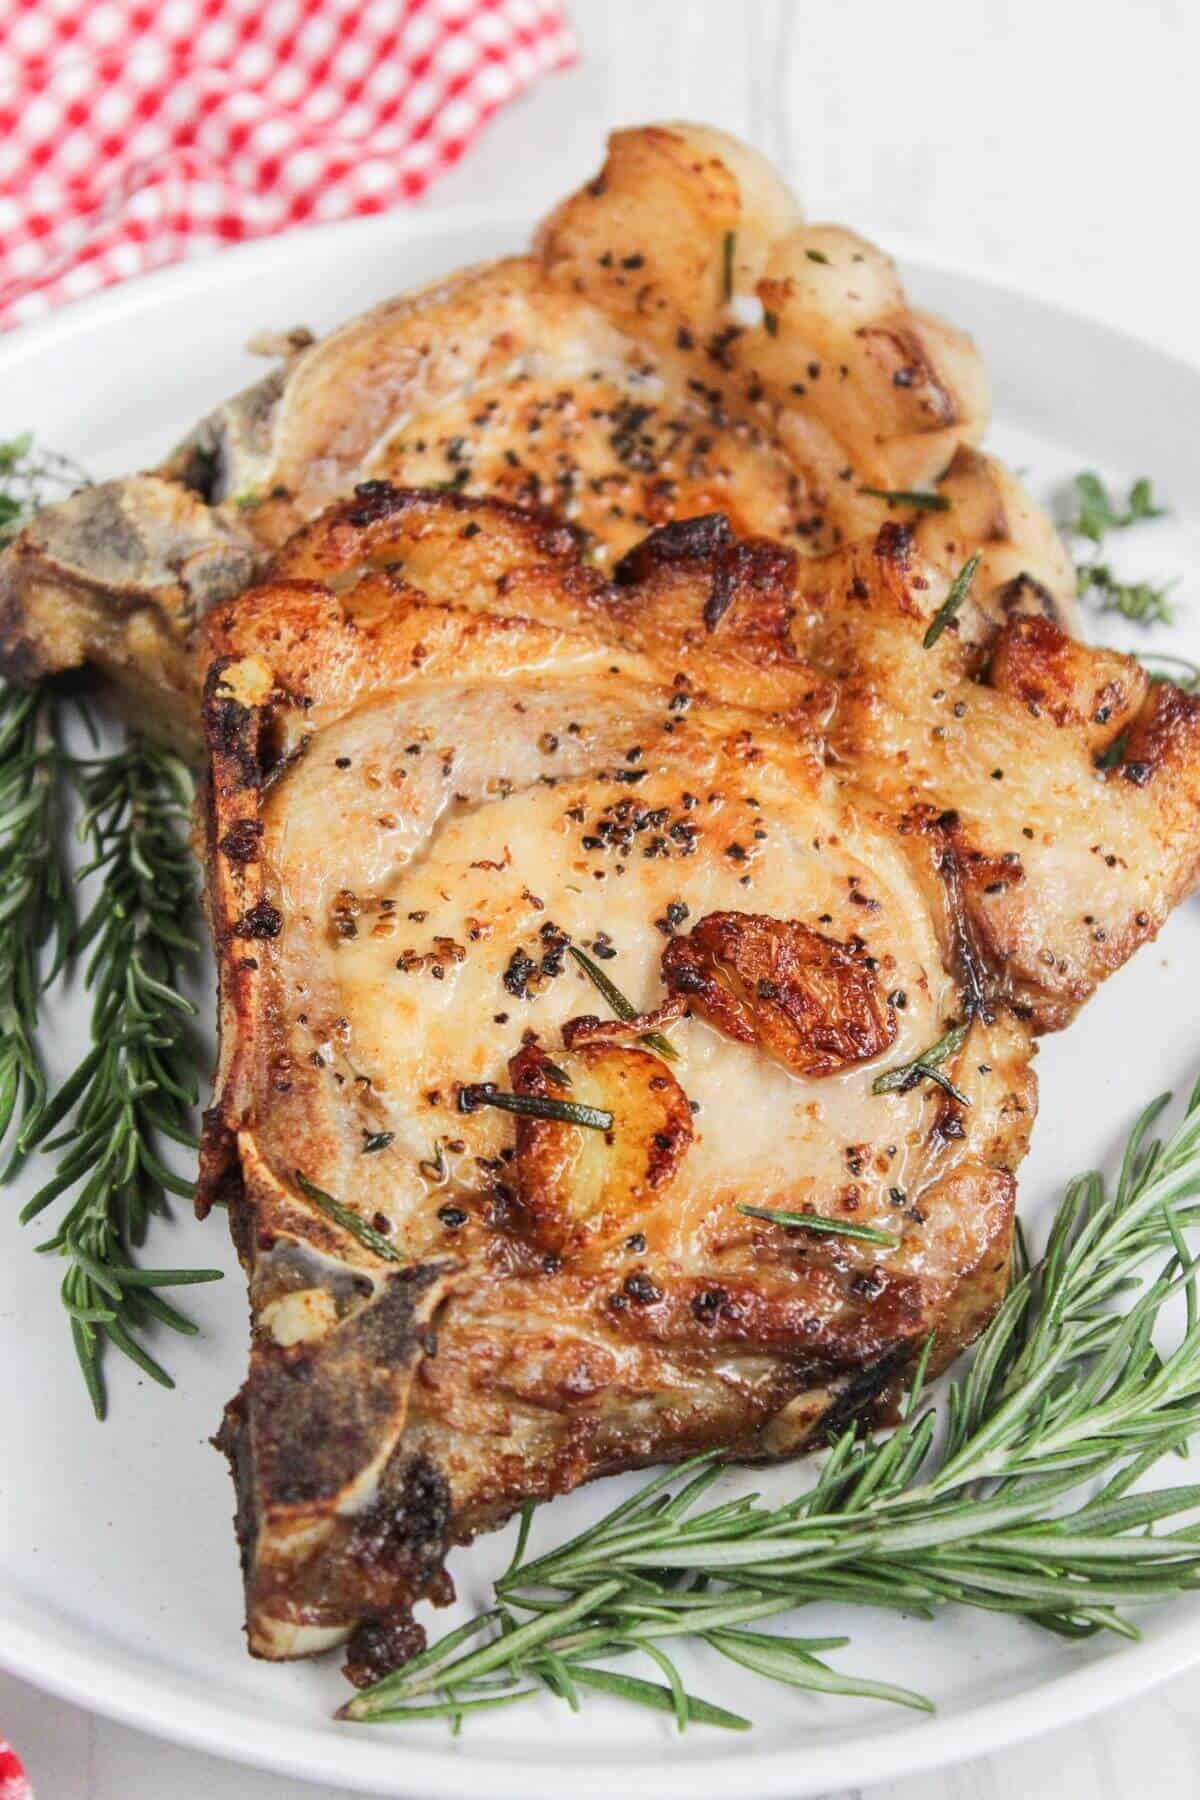 Pork chops on a white plate with rosemary sprigs.